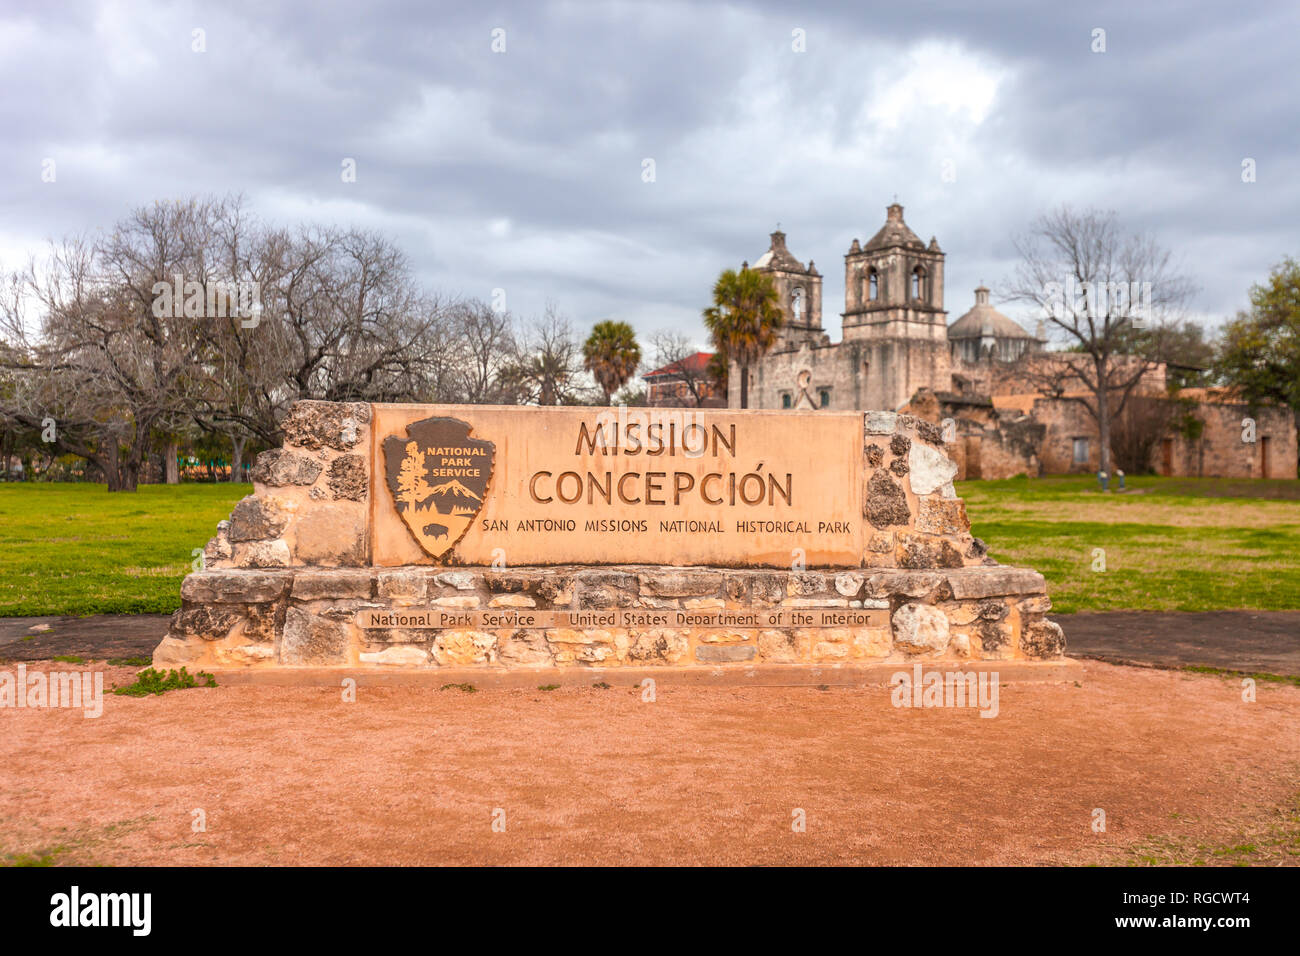 SAN ANTONIO, TEXAS - JANUARY 26, 2019 - Mission Conception entrance - example of Spanish Colonial Architecture - UNESCO site Stock Photo